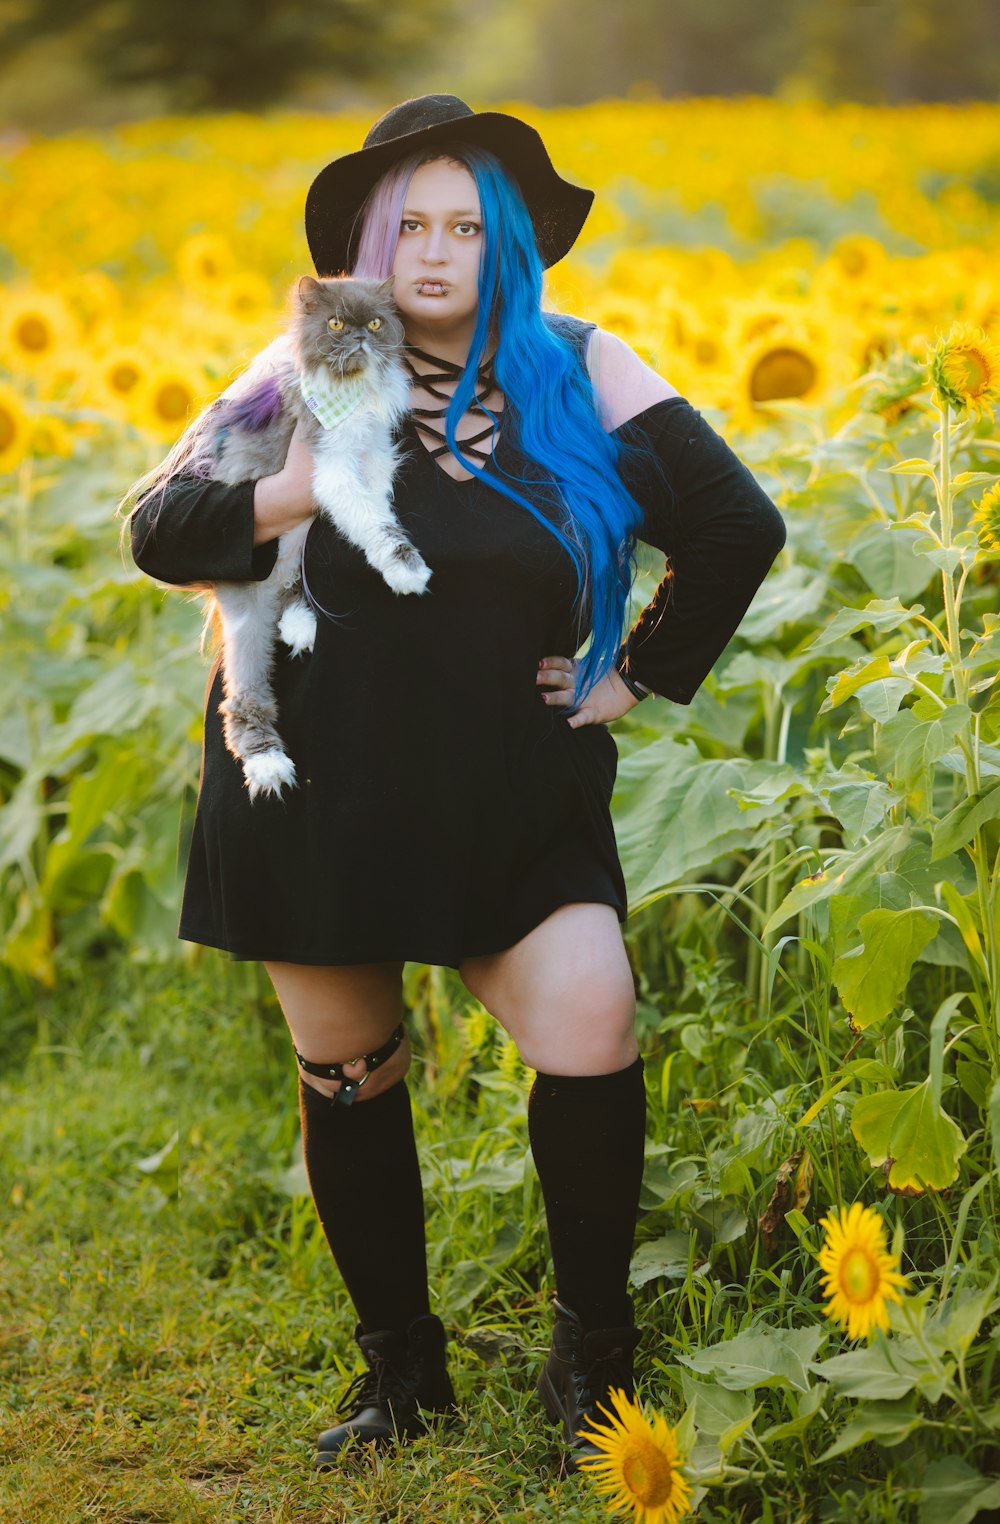 a woman with blue hair is holding a cat in a field of sunflowers